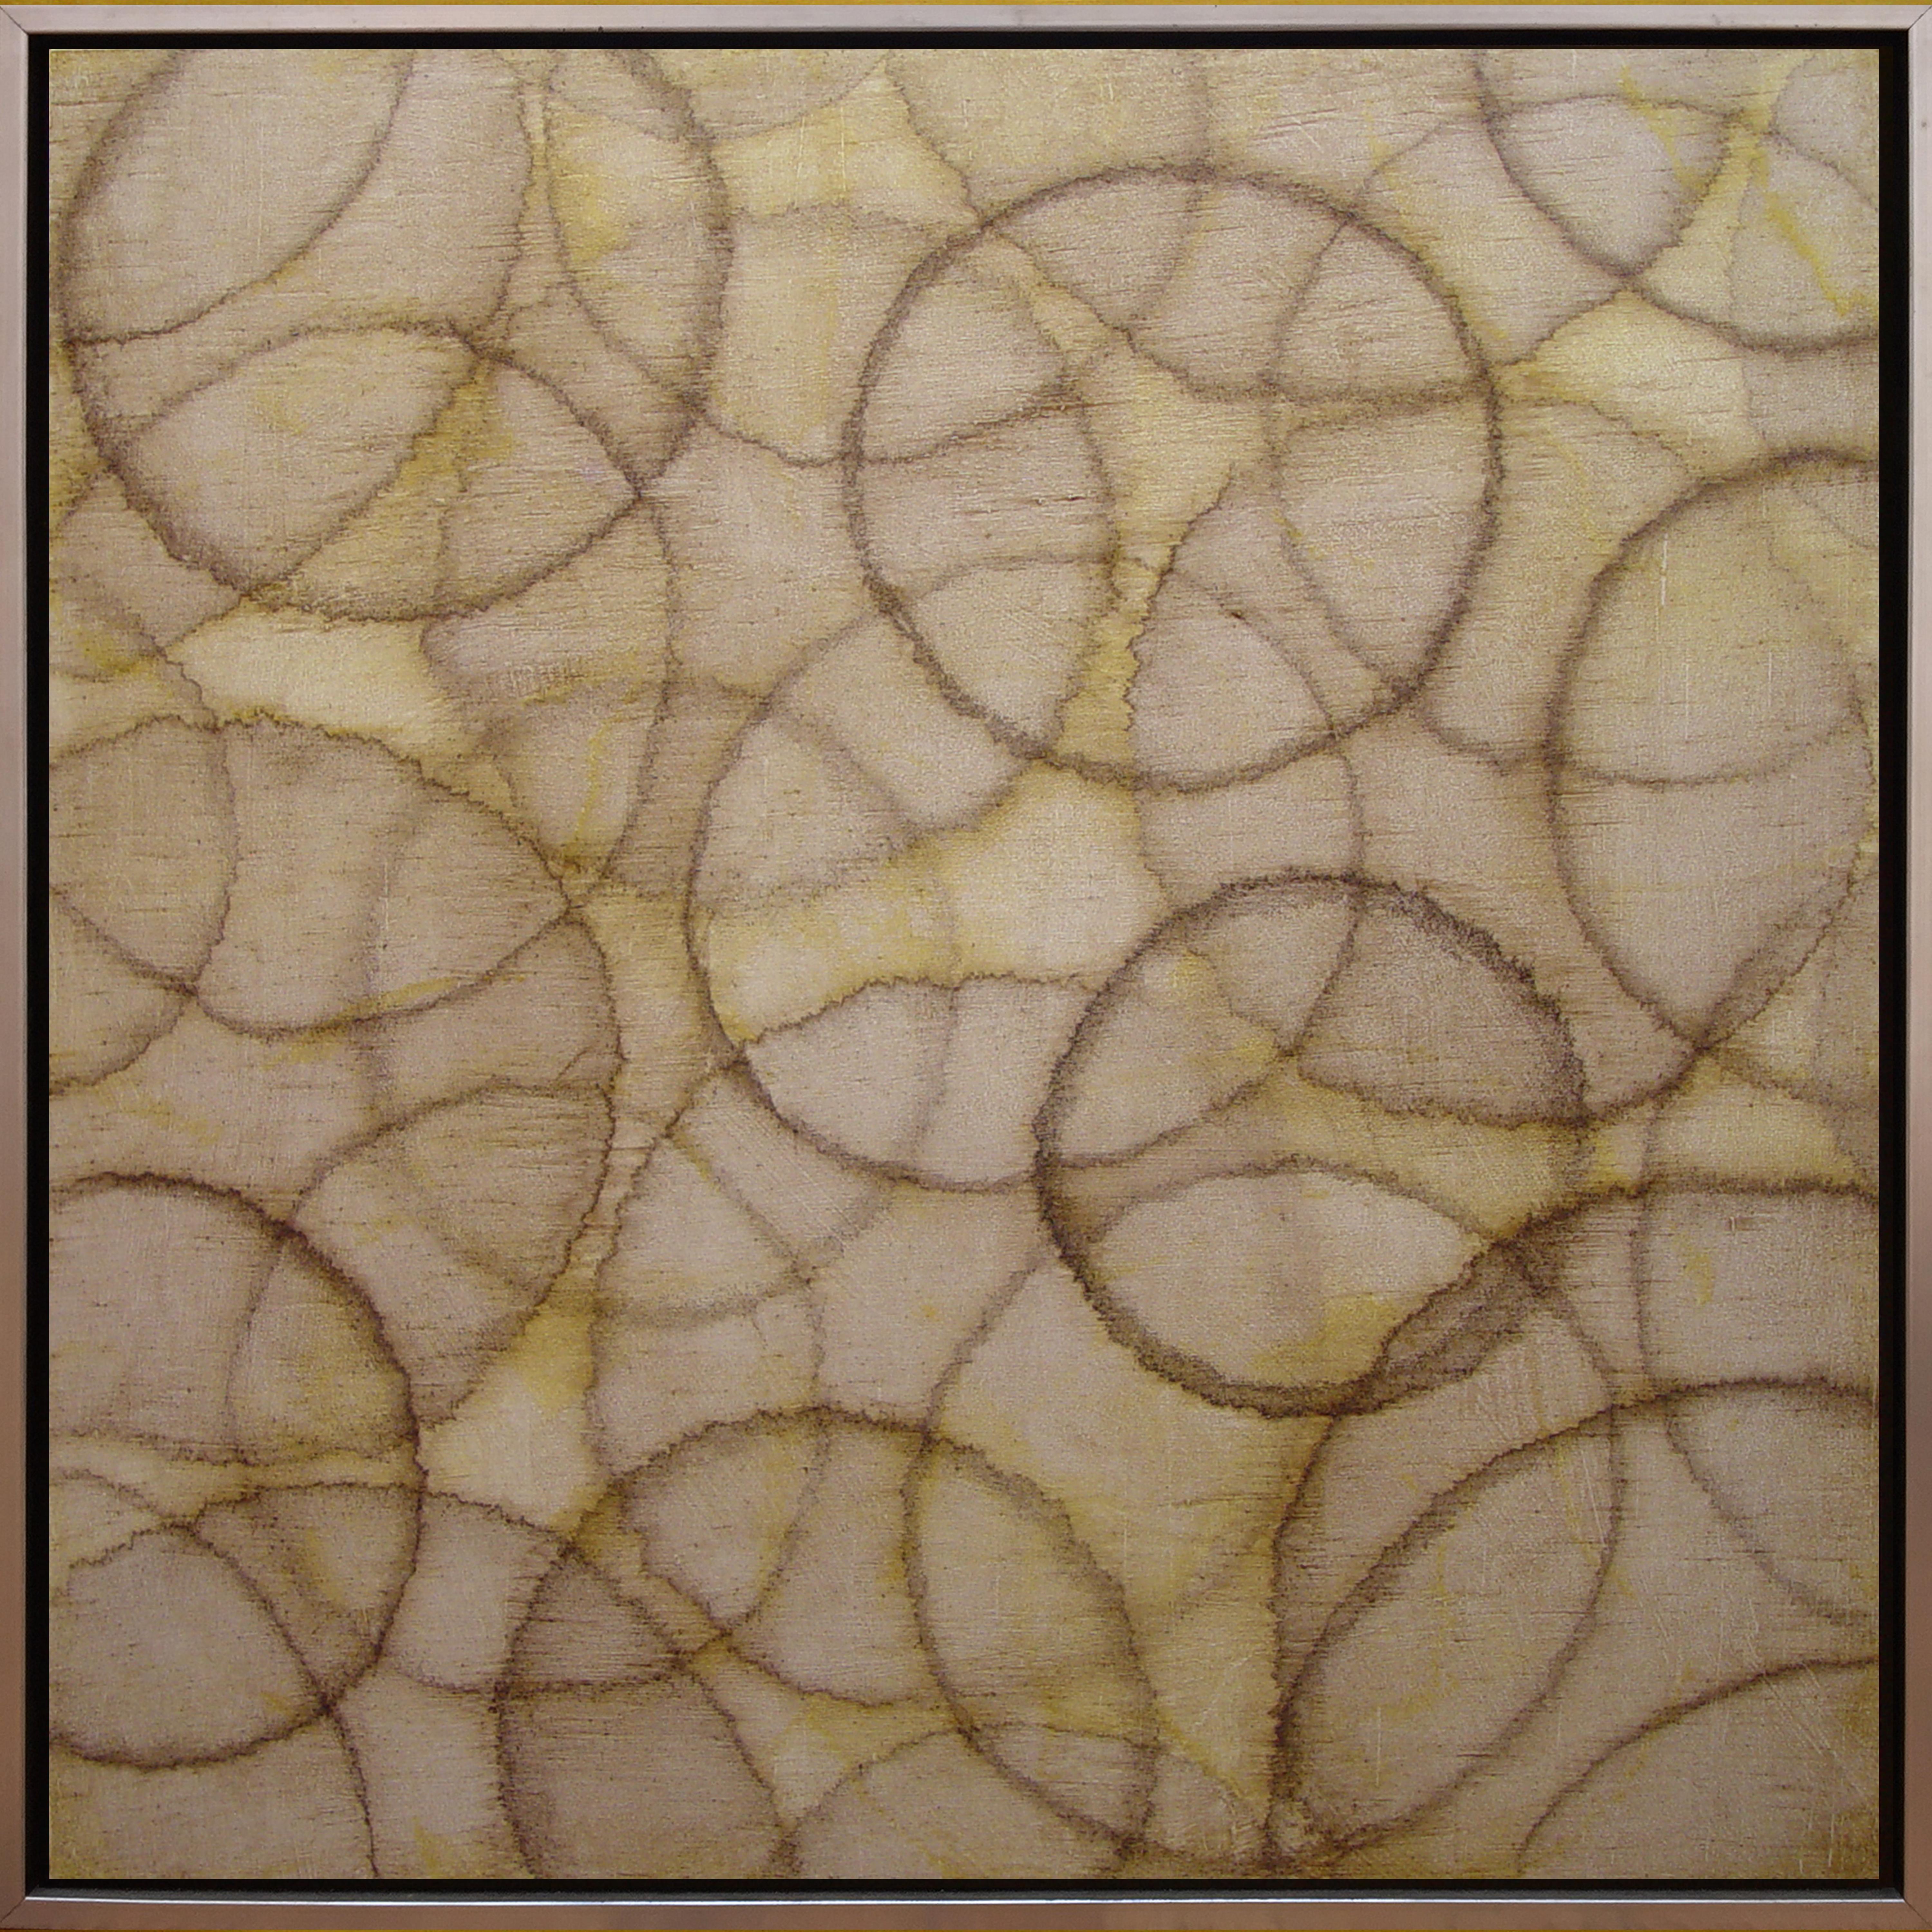 This abstract painting by Roger Mudre features light, translucent outlines of circles which are layered over one another throughout the composition. It has a light, champagne-colored palette. The painting itself measures 24